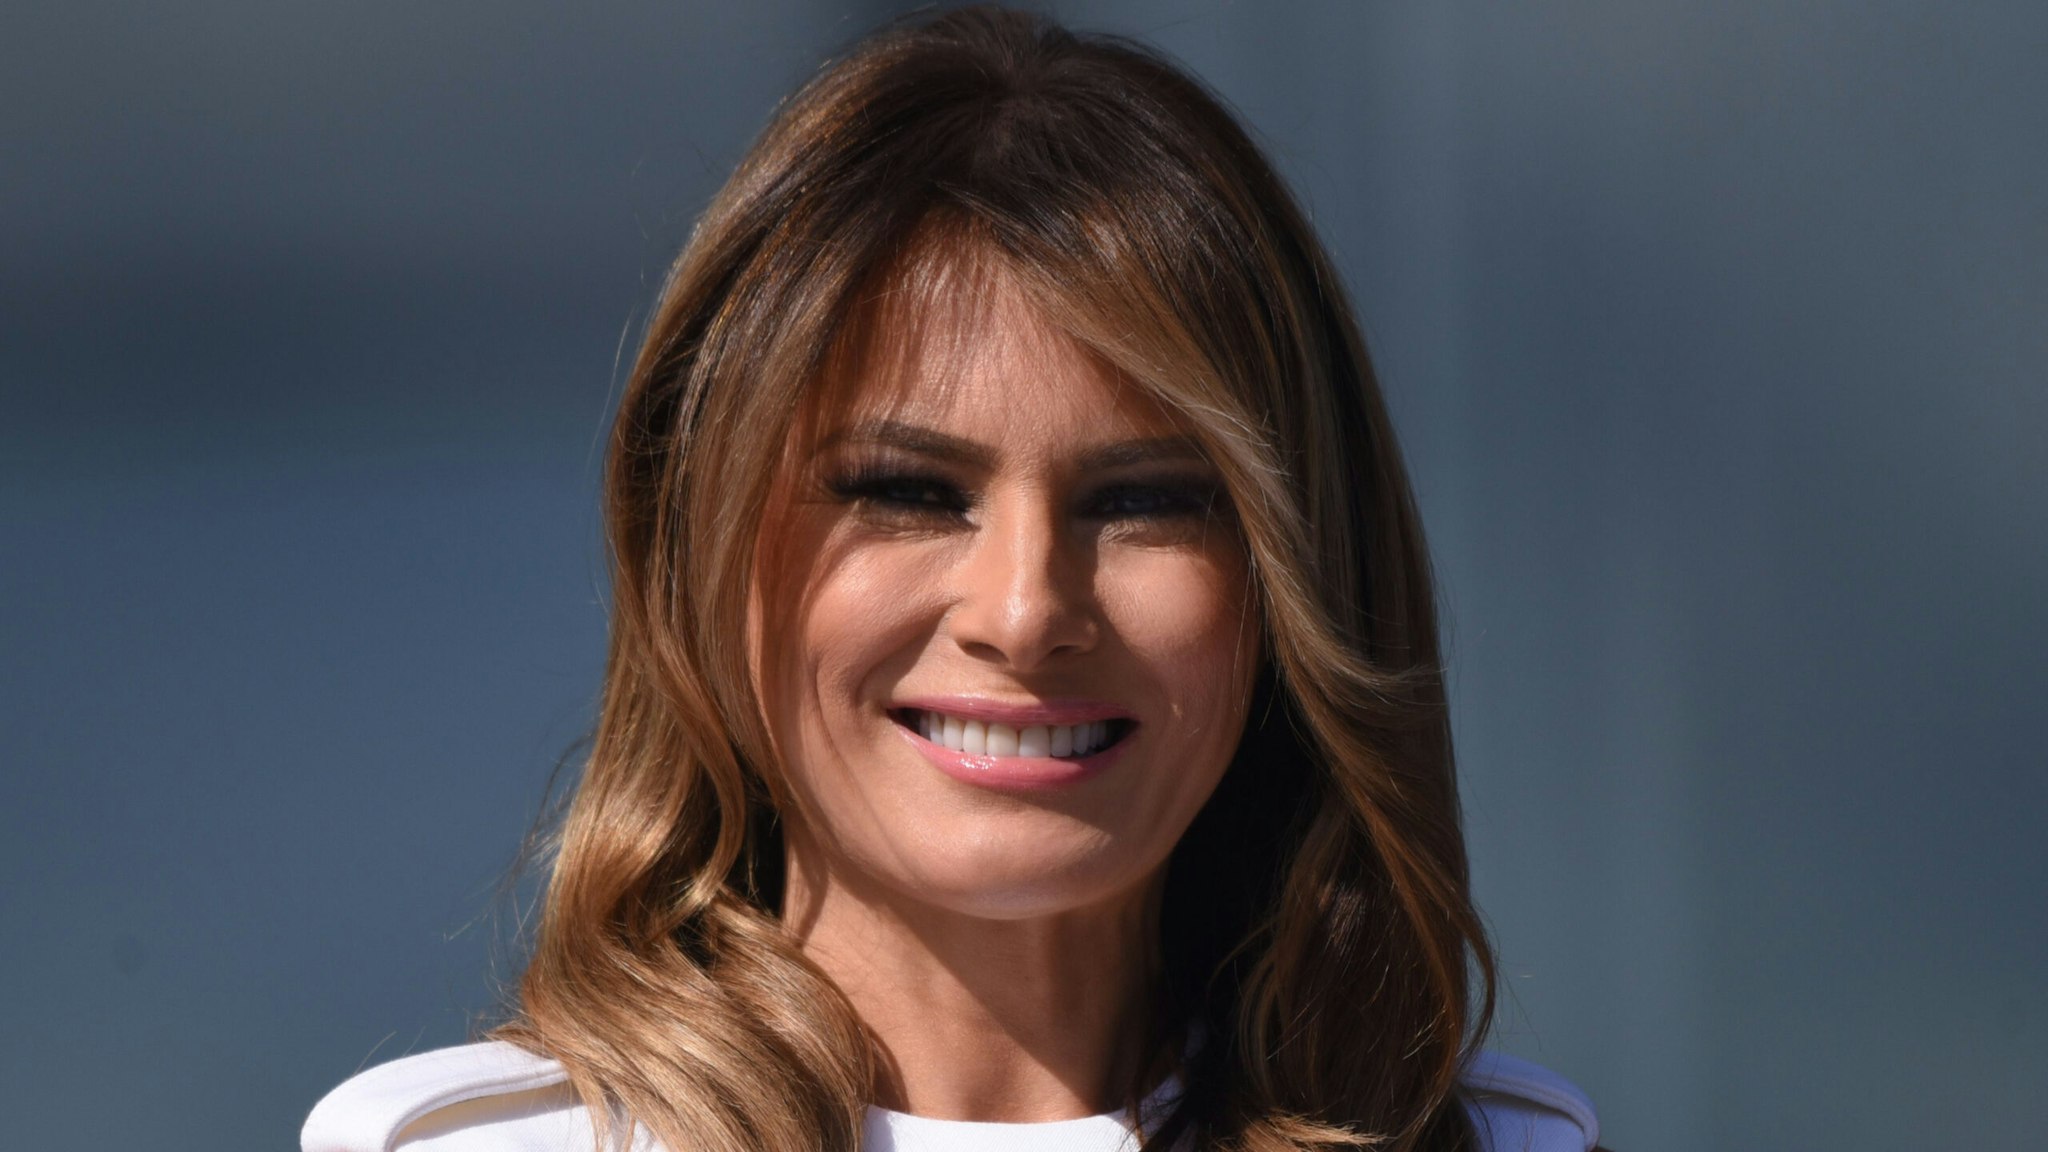 US First Lady Melania Trump looks during the reopening of the Washington Monument on the National Mall on September 19, 2019 in Washington, DC.